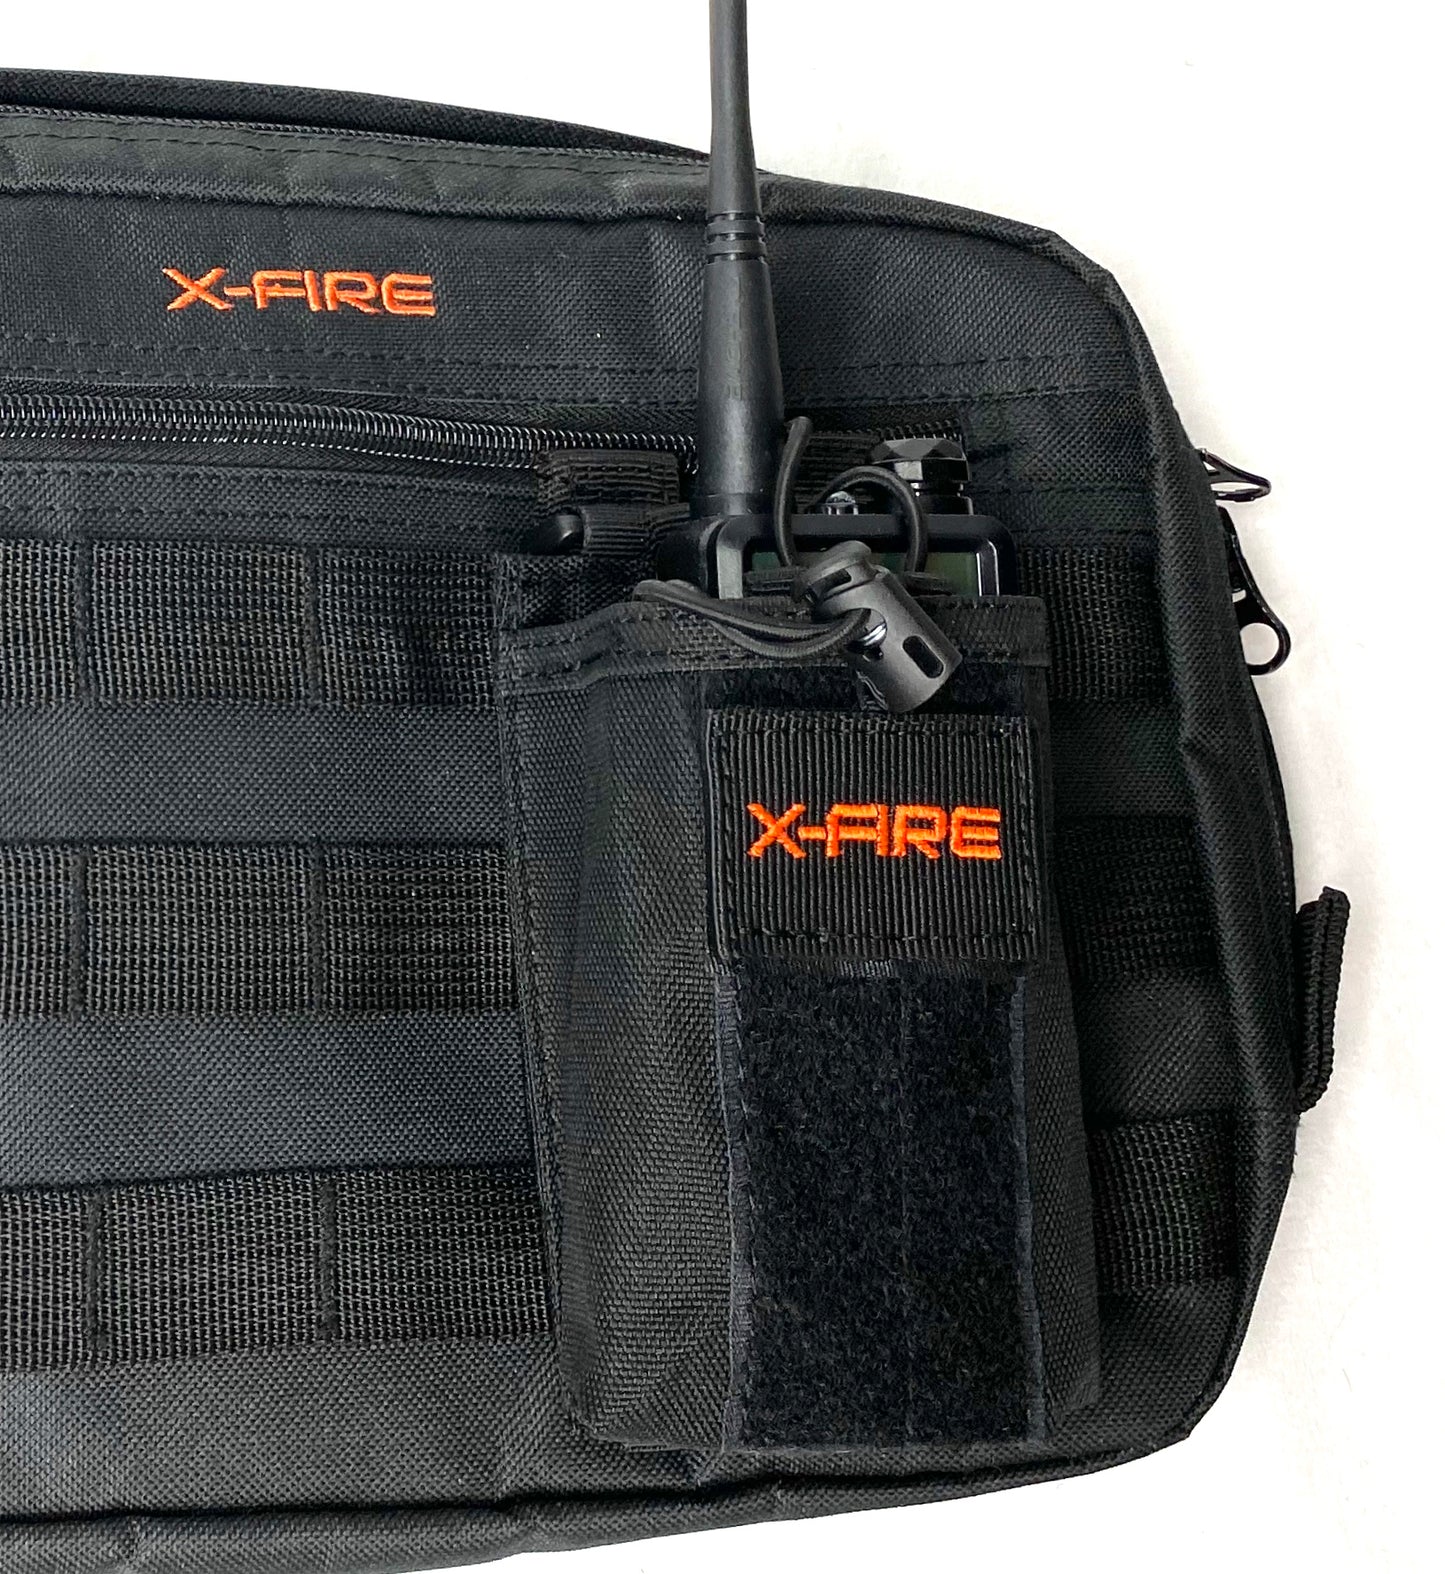 X-FIRE® Compact Washable Portable Radio MOLLE Pouch or Duty Belt Holder